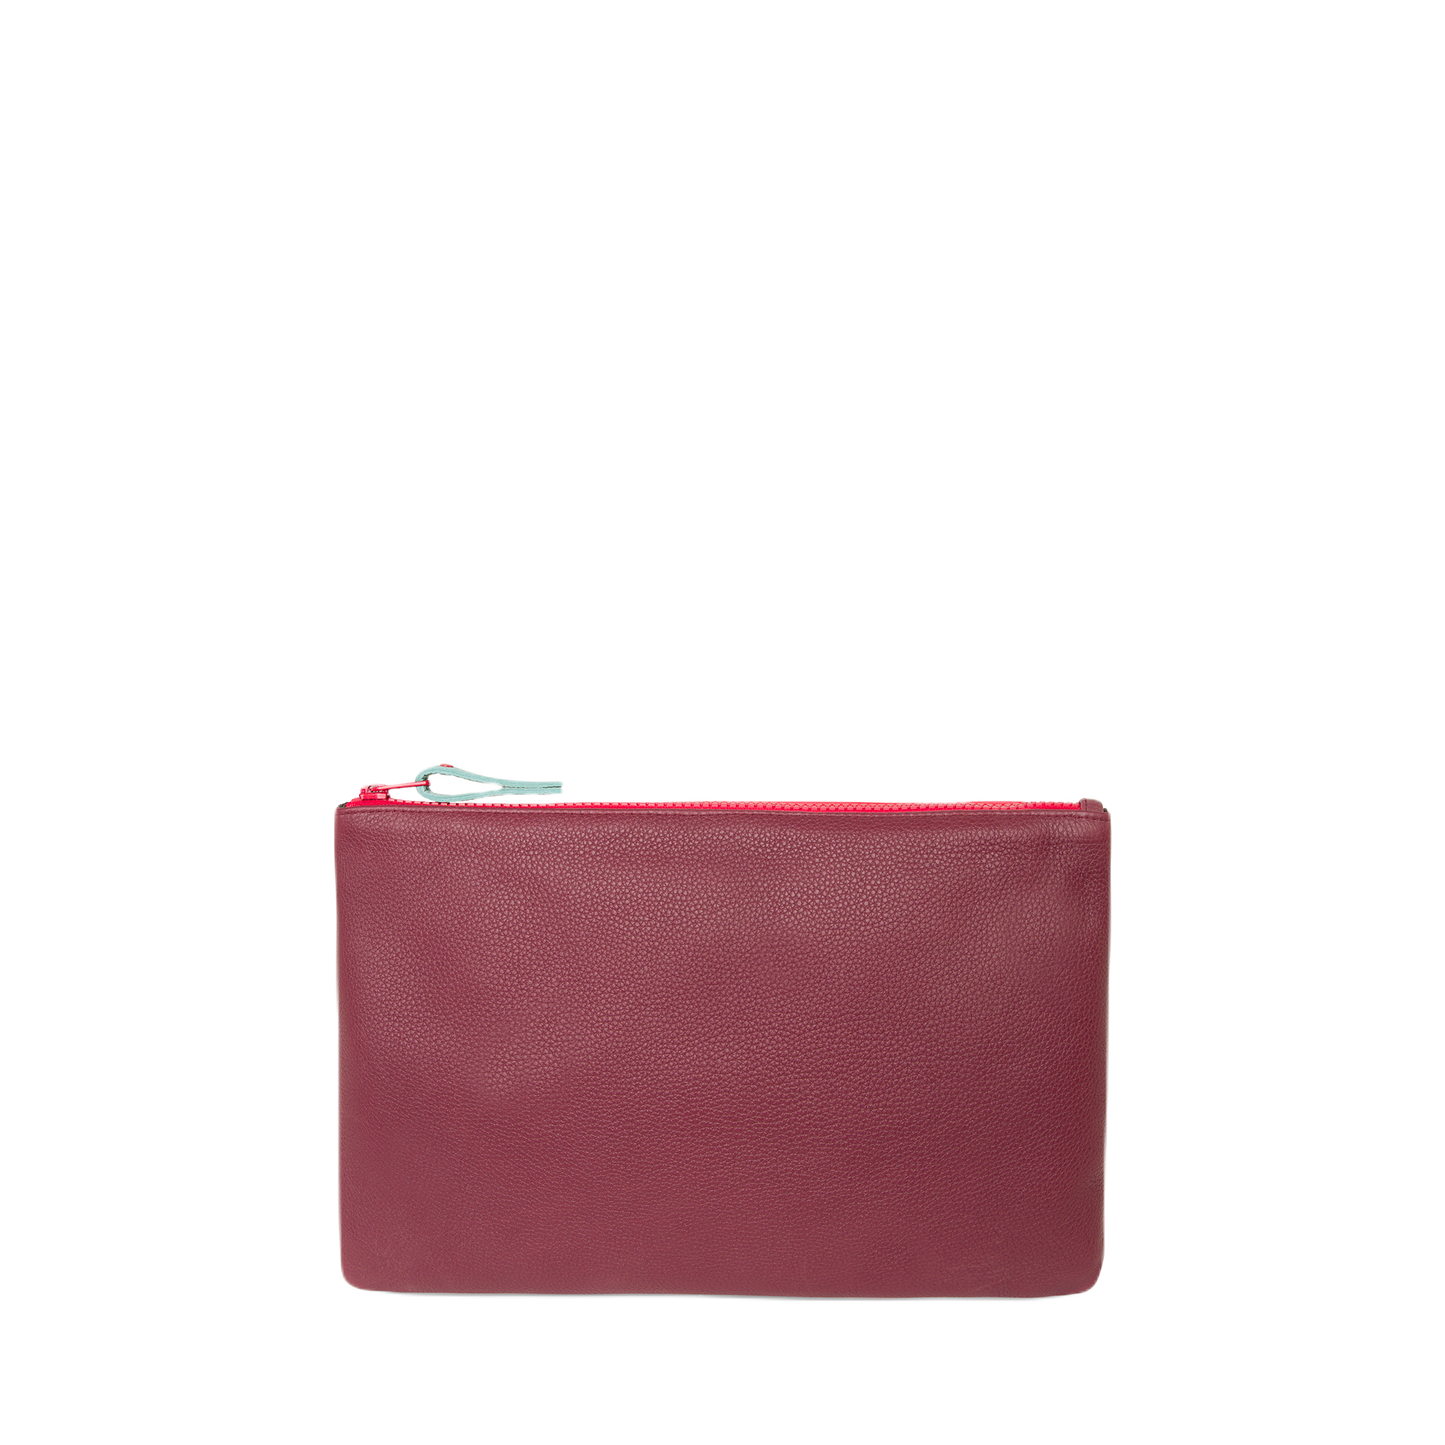 ZIP POUCH S Blue and Maroon